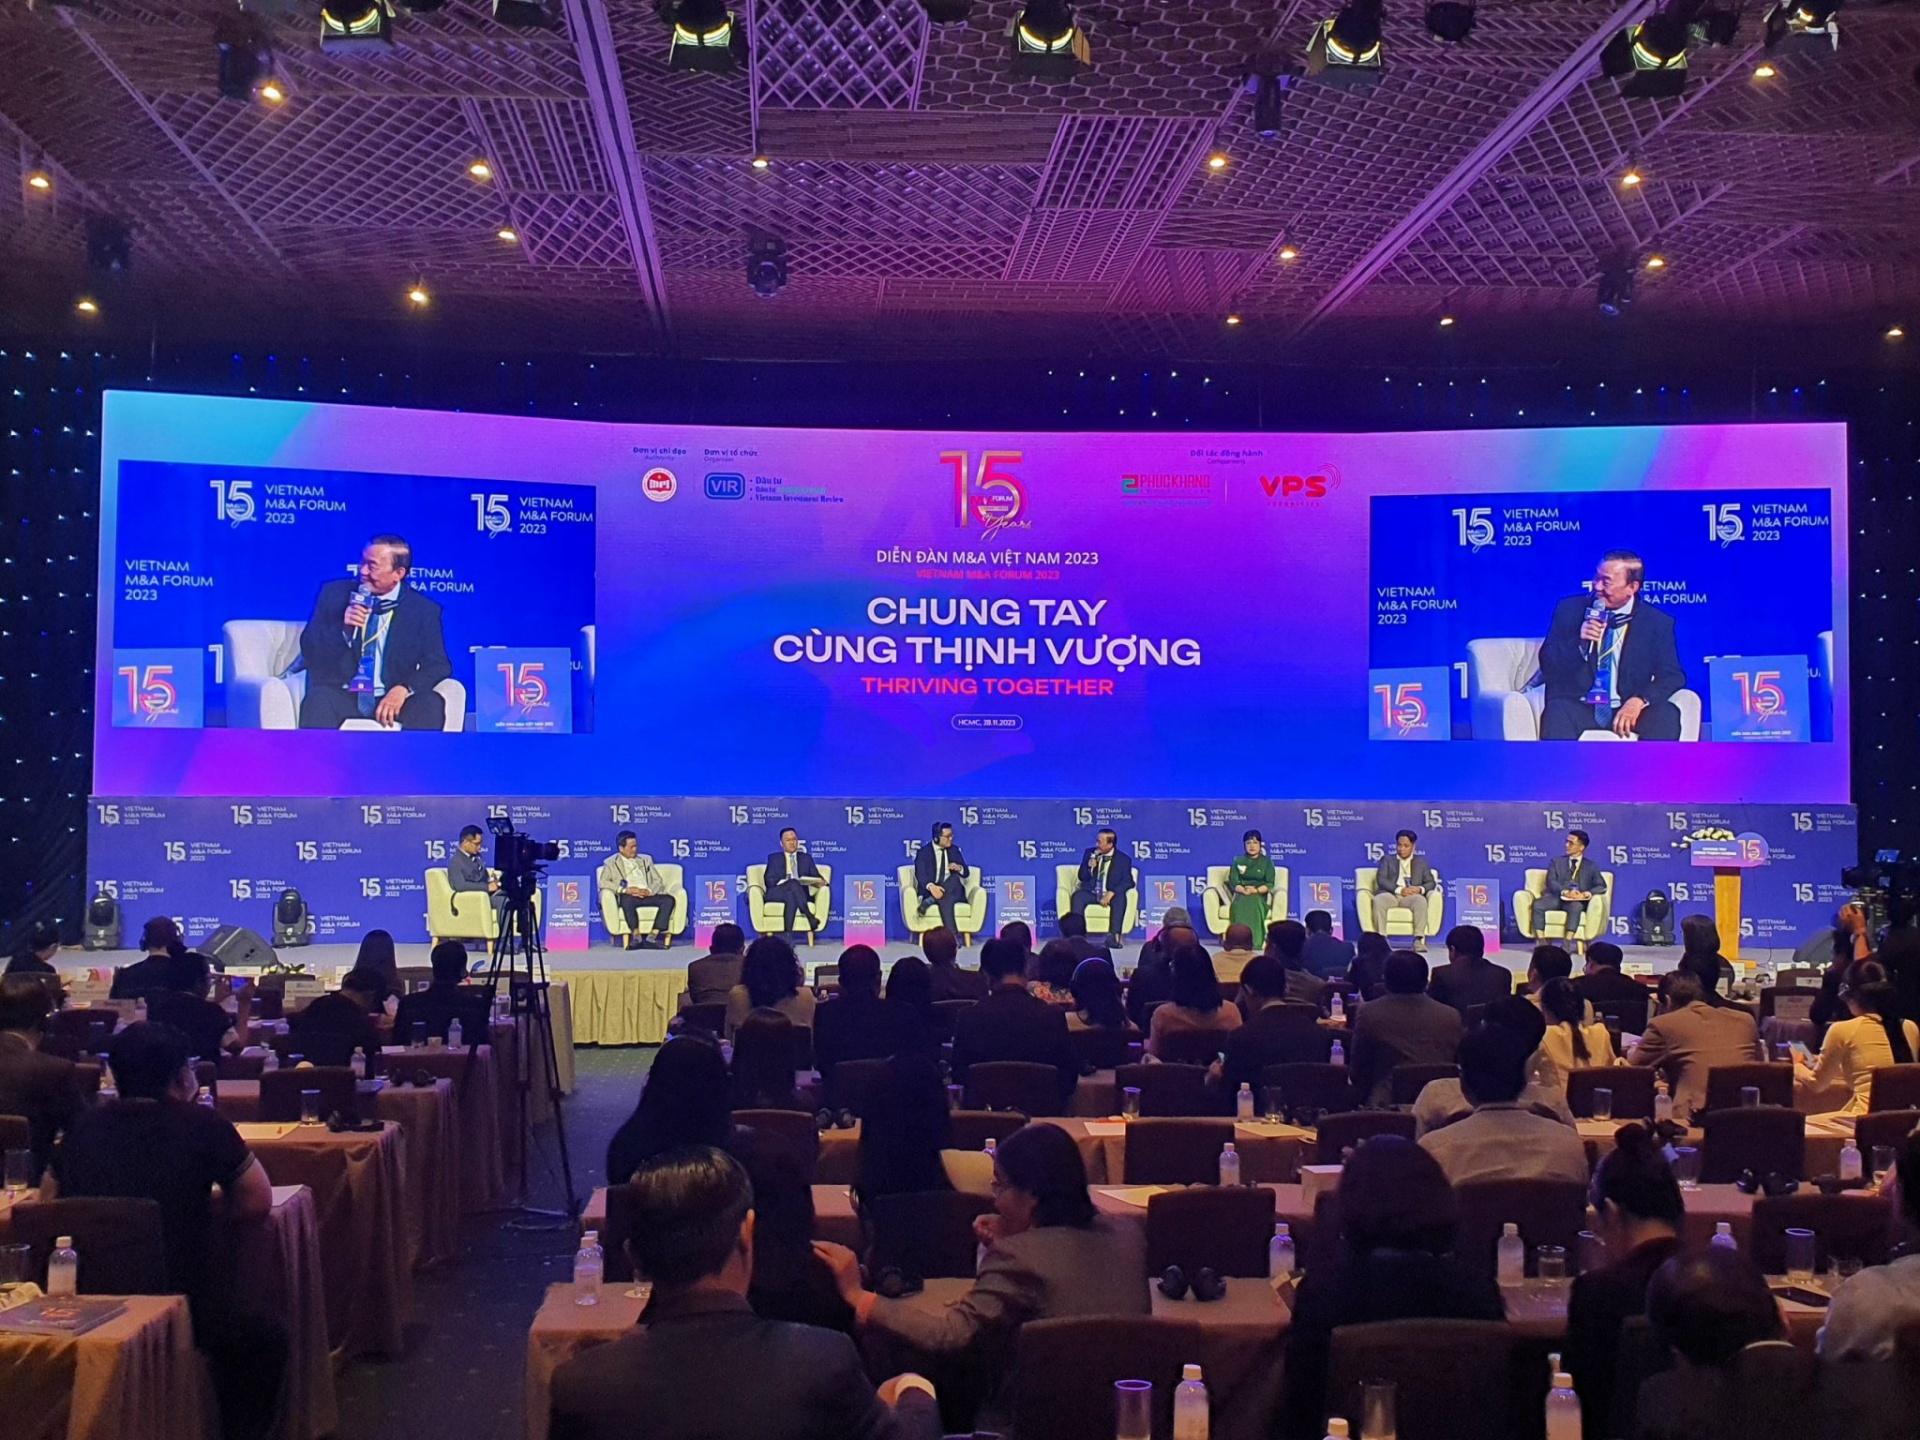 Thriving Together: Collaborative growth in Vietnam's M&A ecosystem